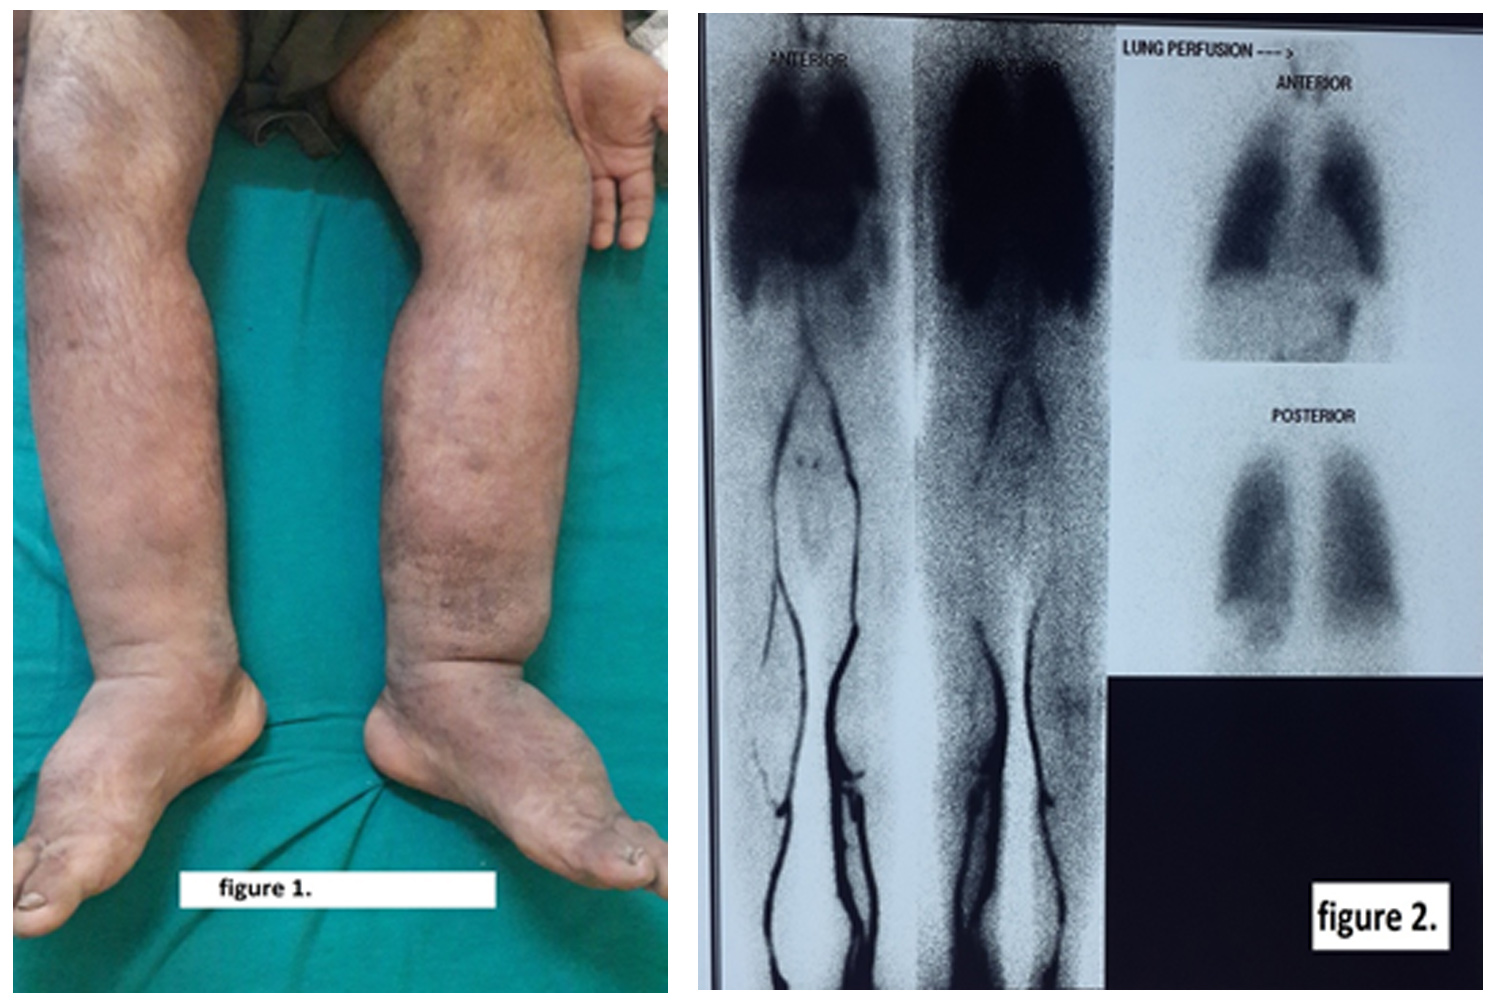 Primary Lymphedema